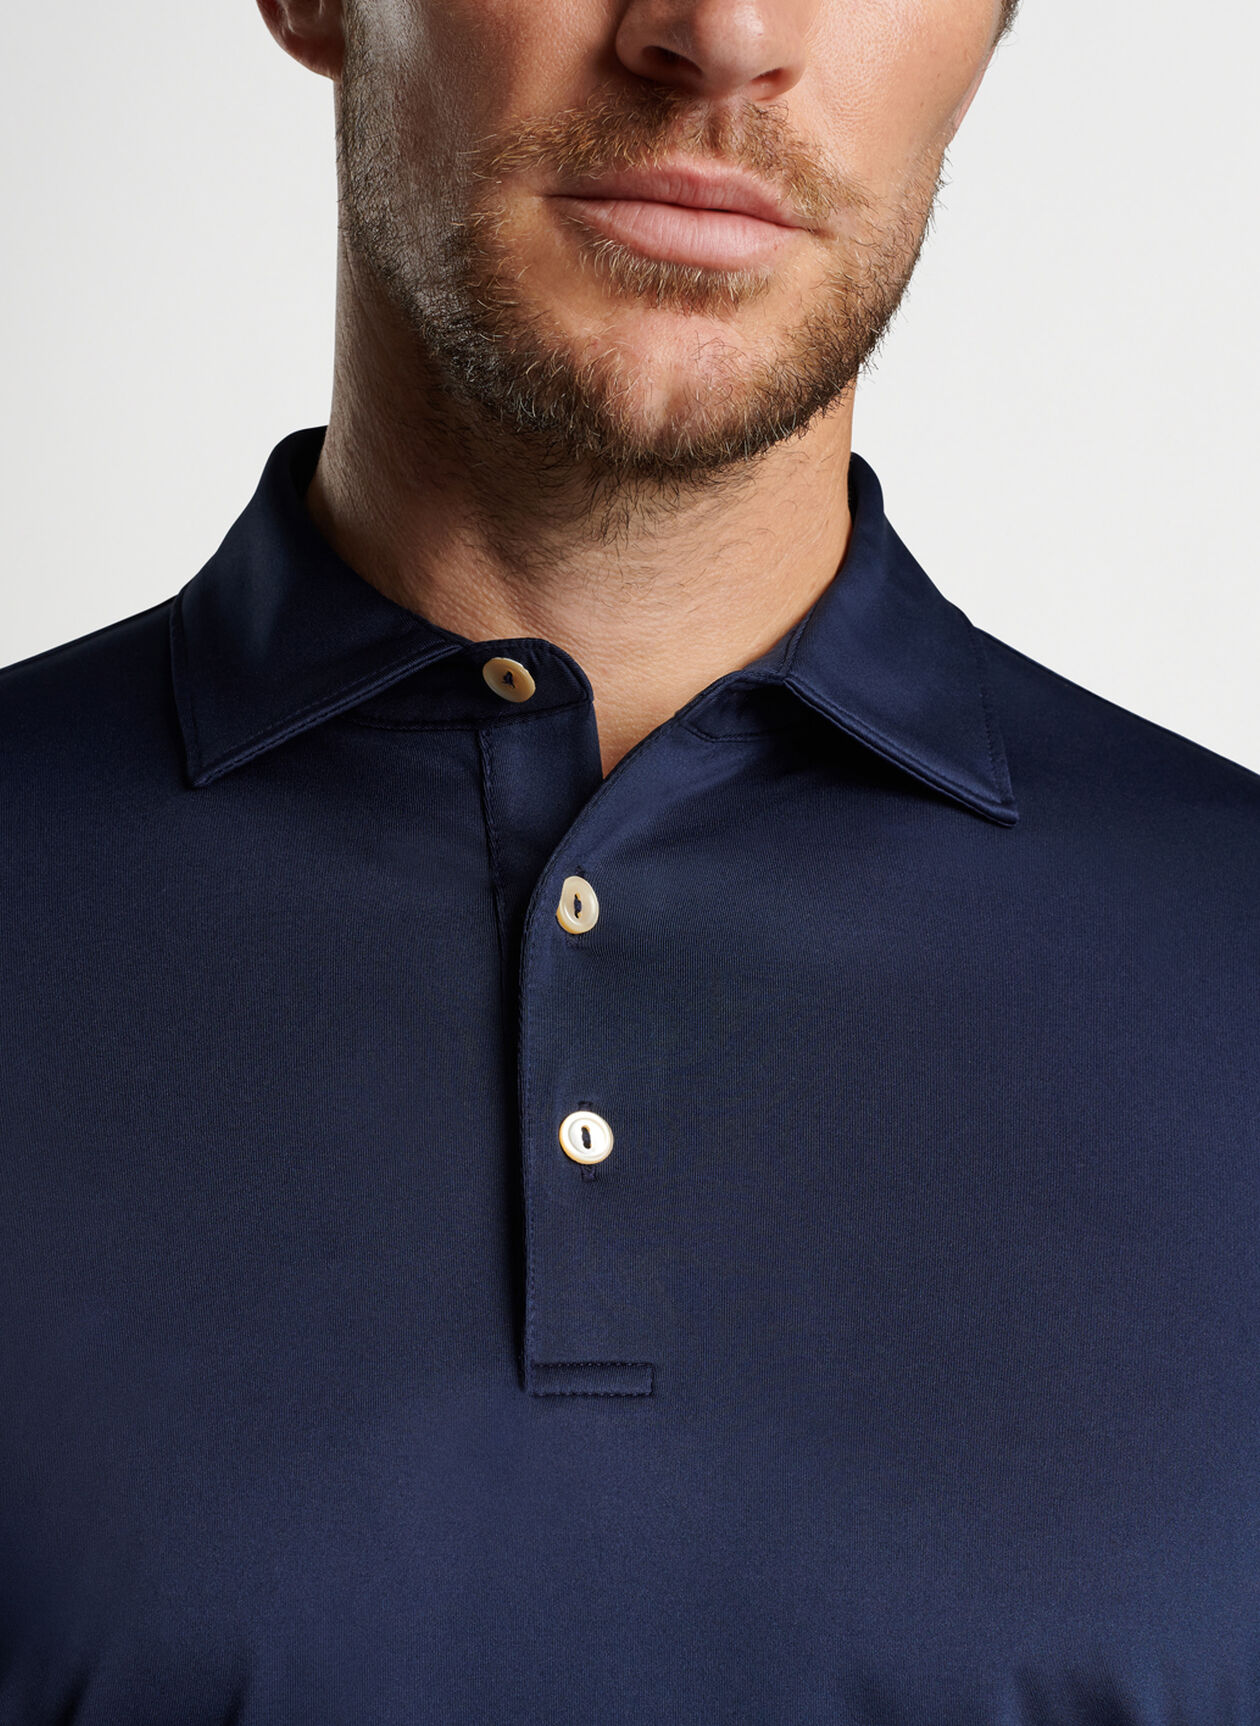 Solid Stretch Jersey Long Sleeve Polo | Men's Polo Shirts | Peter Millar